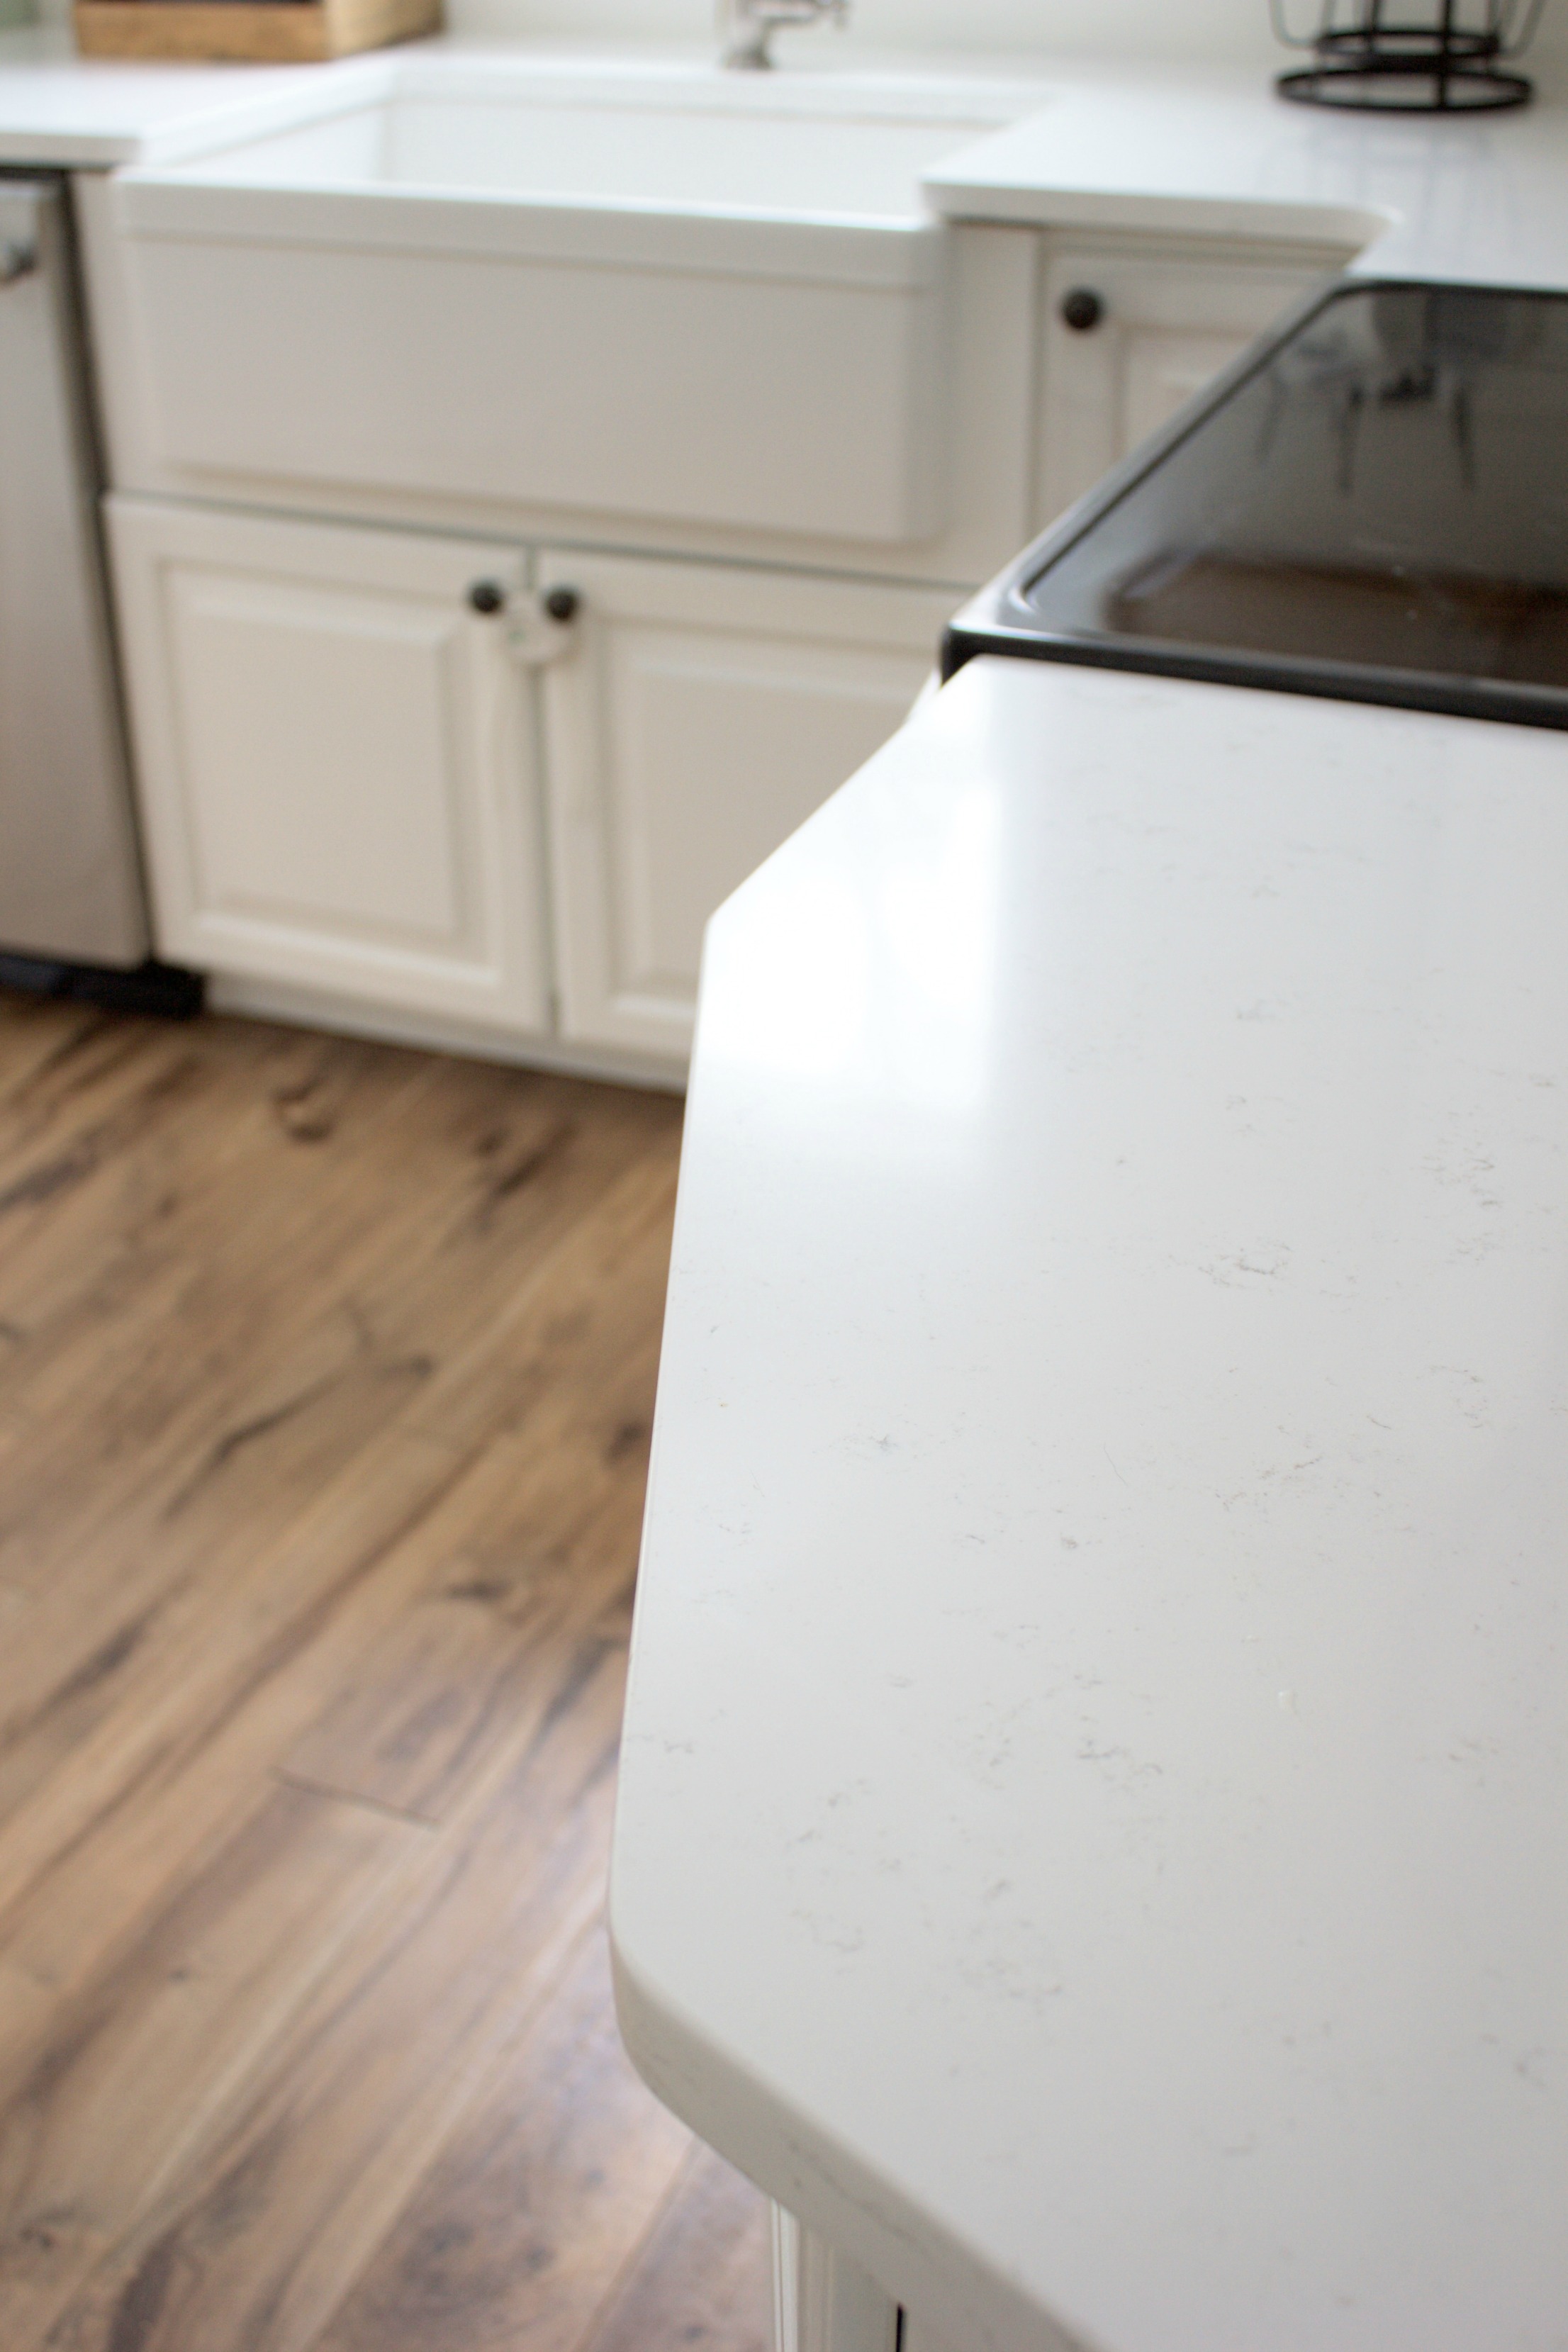 A quartz countertop review and why choose quartz over other materials for countertops